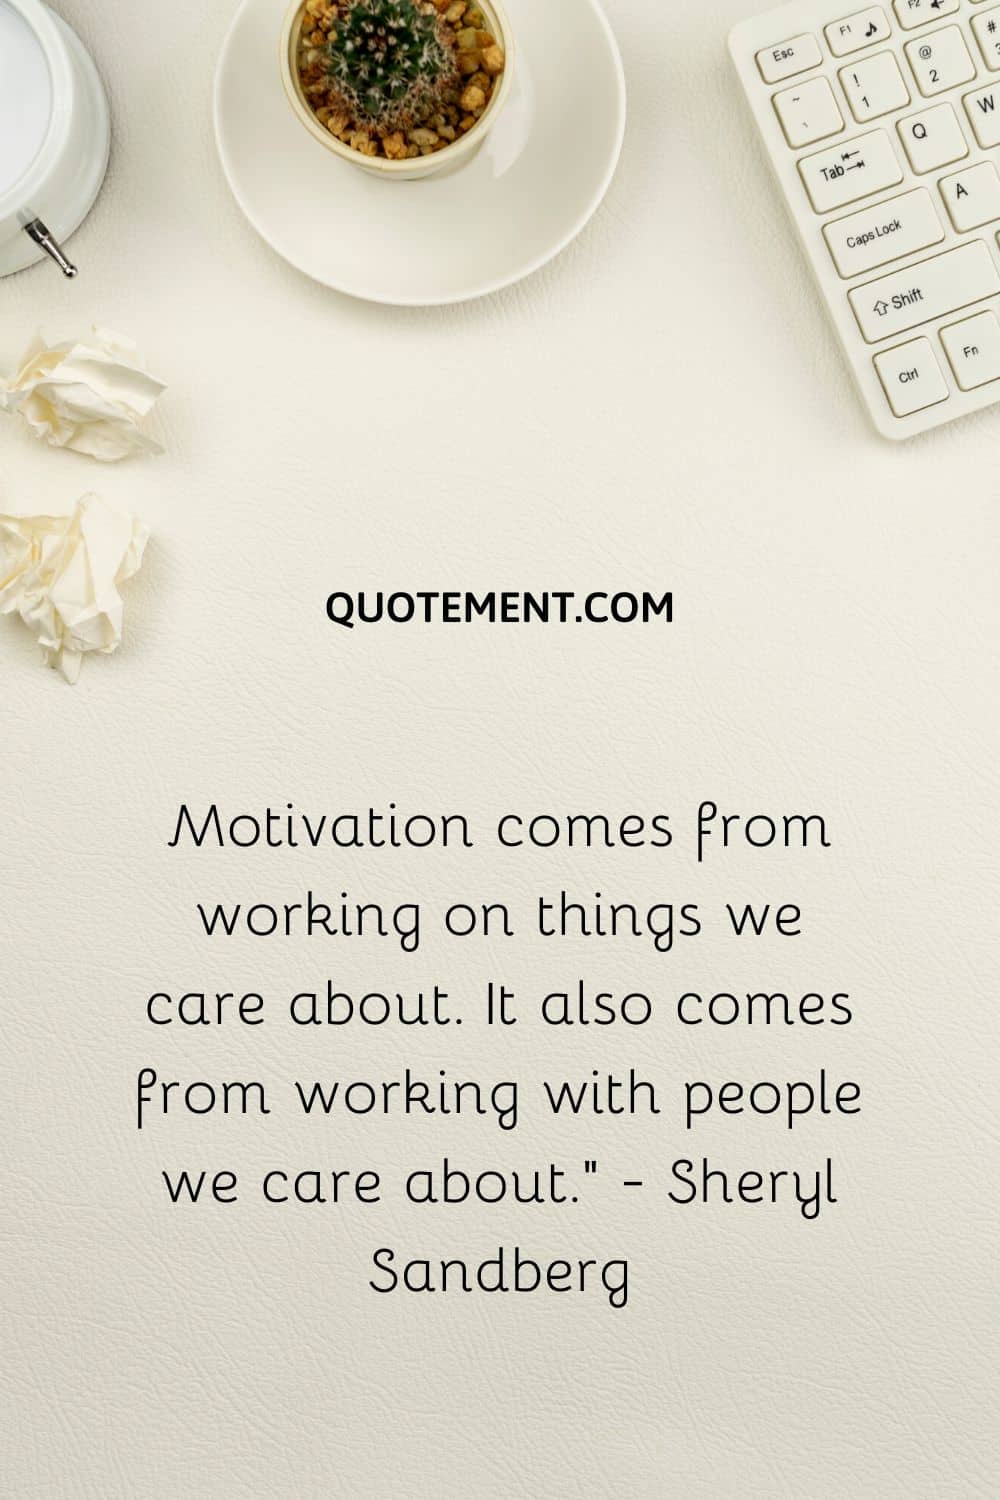 Motivation comes from working on things we care about. It also comes from working with people we care about.” - Sheryl Sandberg